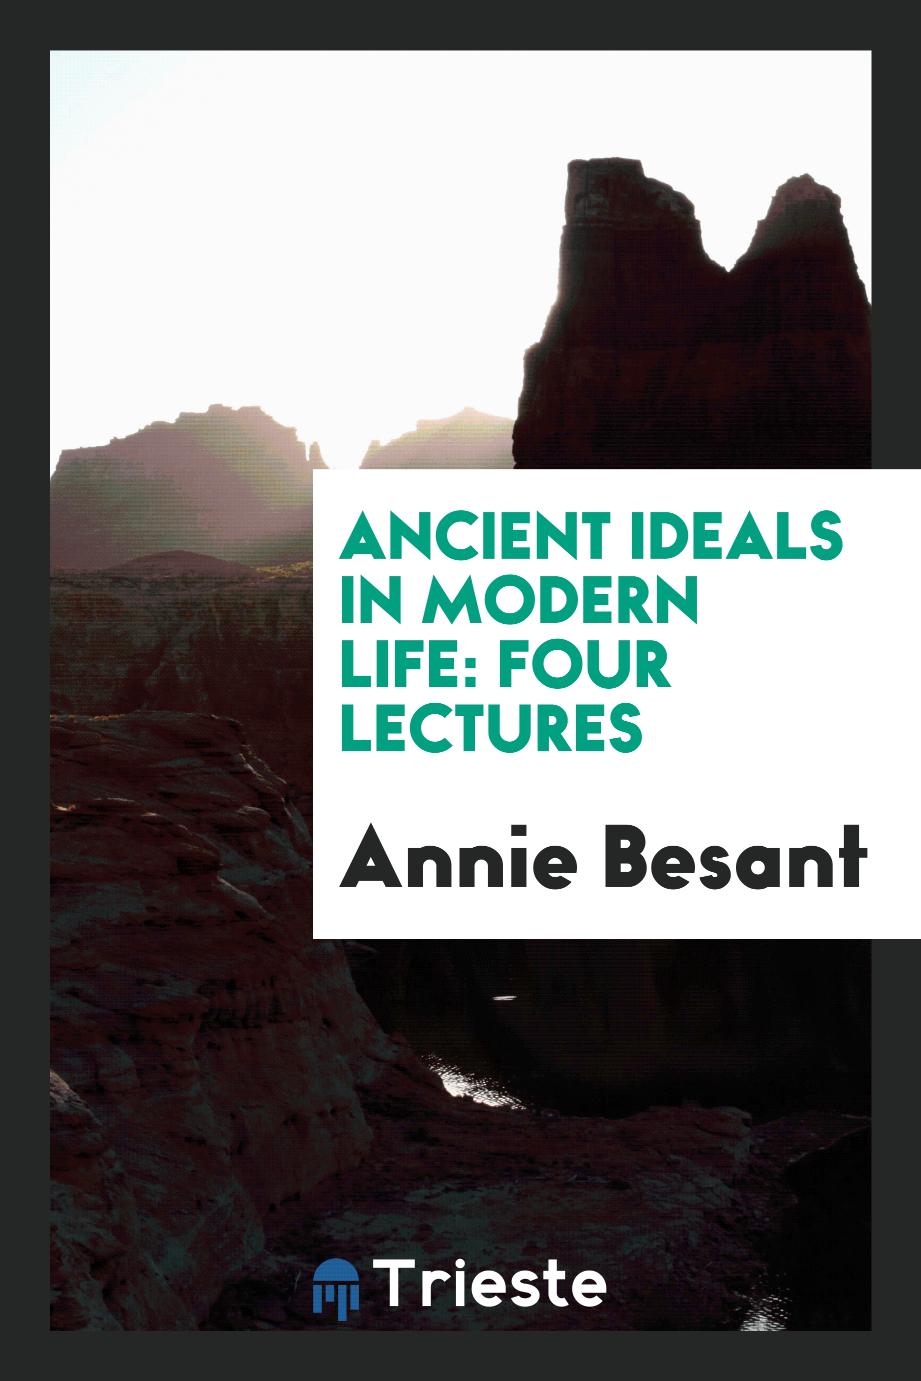 Ancient Ideals in Modern Life: Four Lectures